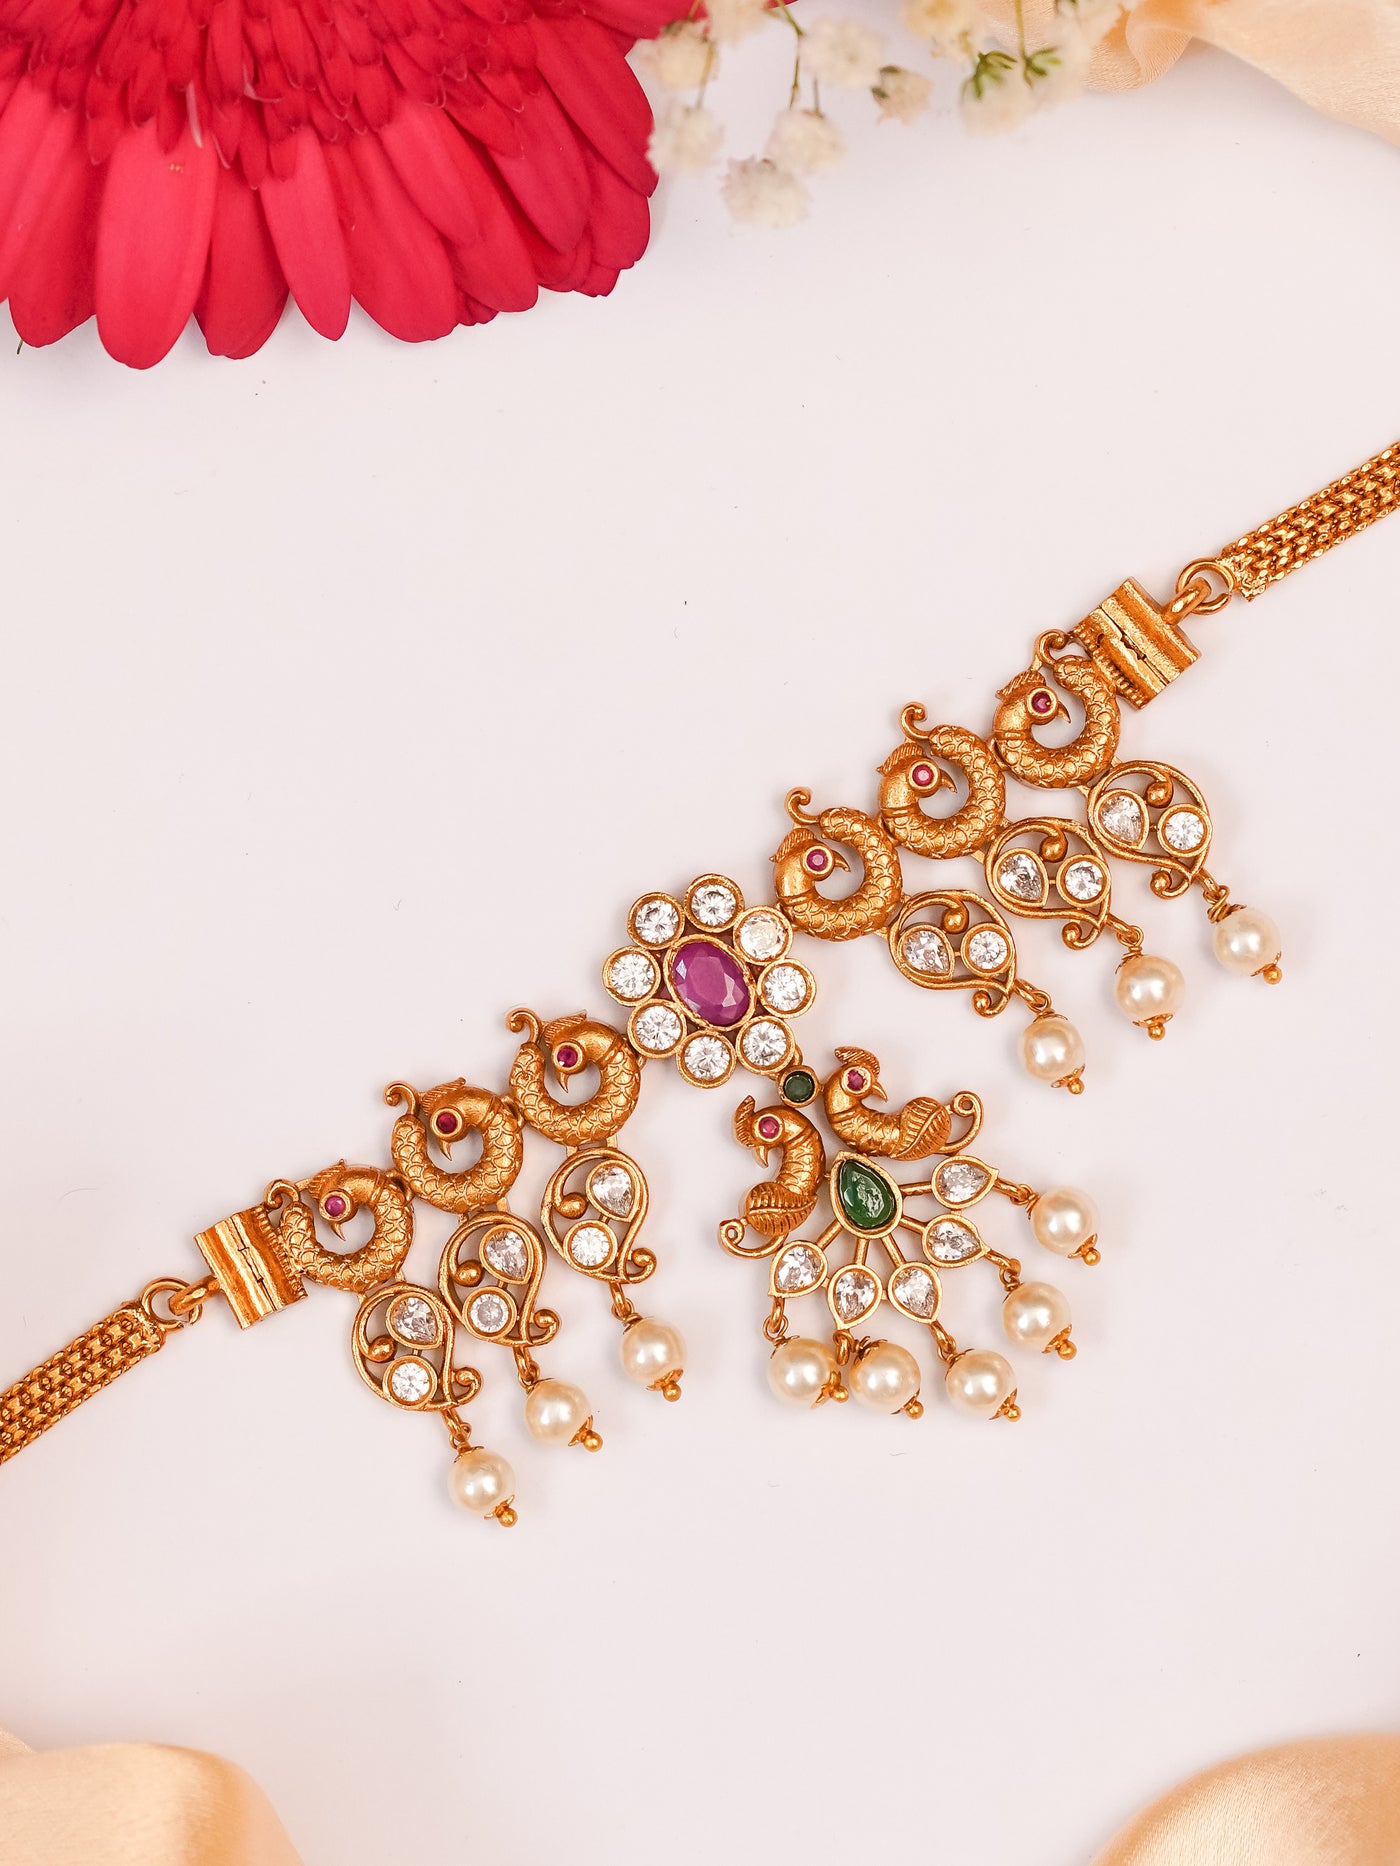 South indian jewellery online shopping | south indian antique gold jewellery designs| south indian necklace set | south indian artificial jewellery | south indian bridal set | Kemp pearl necklace | princess Necklace | Peacock Necklace